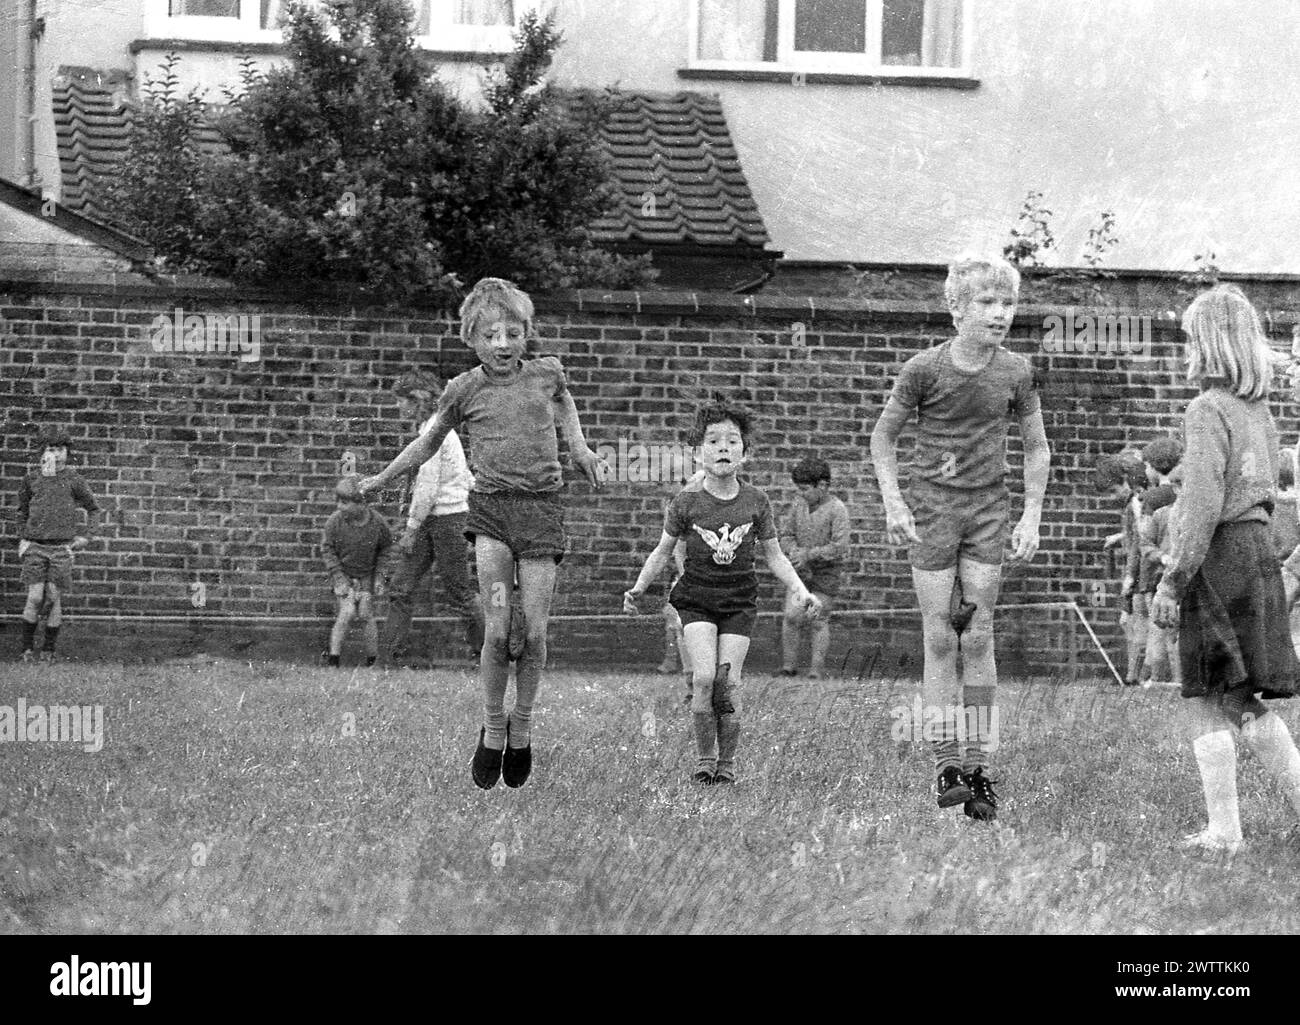 1970s, historical, primary school sports, outside in a grass field, young children taking part in a jumping race holding a sponge between their knees, England, UK. Stock Photo